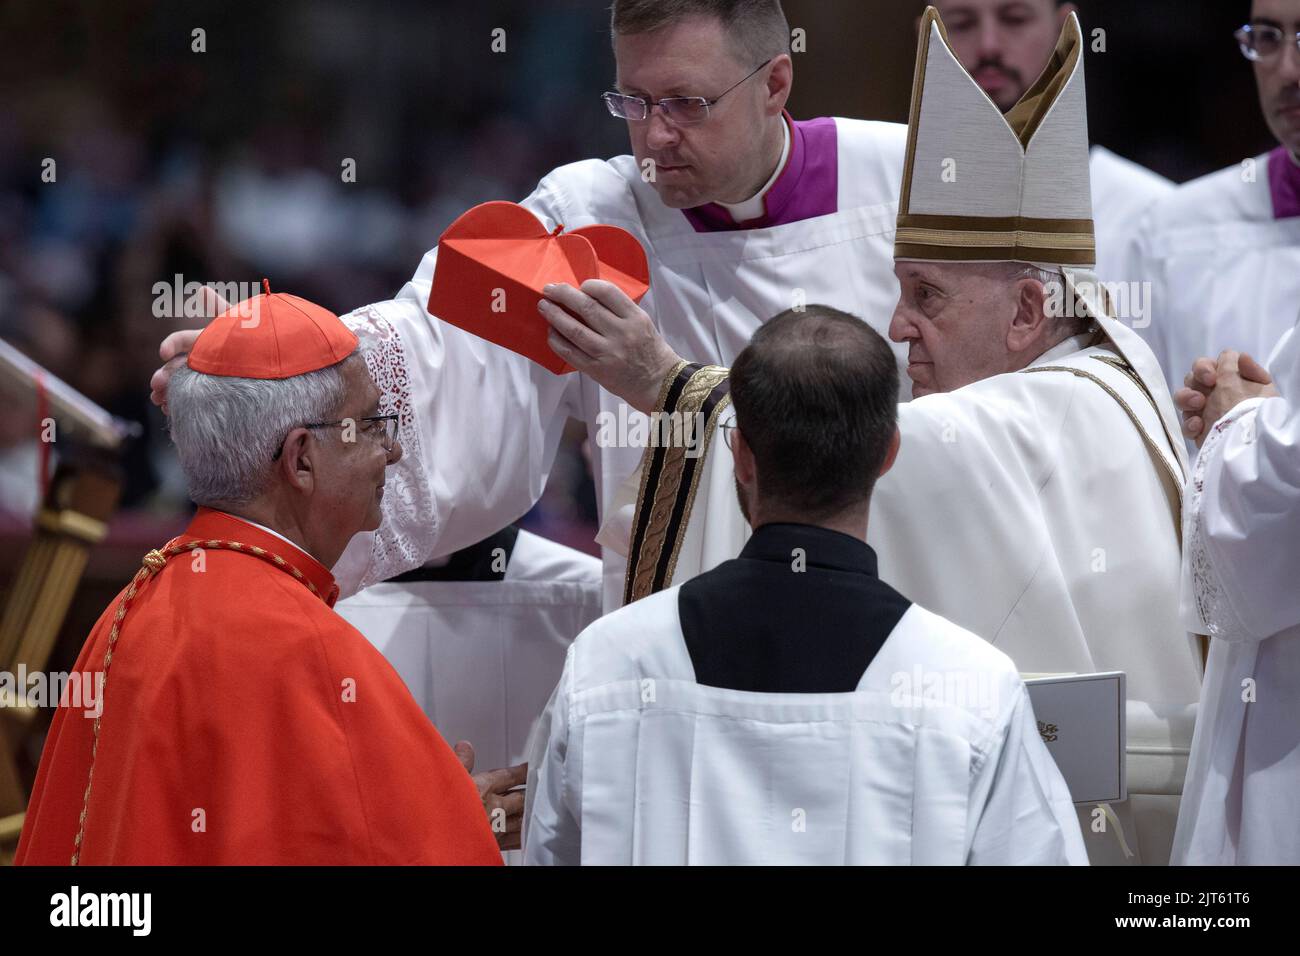 Vatican City, Vatican, 27 August 2022.   Newly appointed Cardinal Adalberto Martinez Flores, archbishop of Asuncion (Paraguay),  receives the red hat, biretta, from Pope Francis during an extraordinary consistory for the creation of 21 Cardinals, in St. Peter's Basilica. Credit: Maria Grazia Picciarella/Alamy Live News Stock Photo